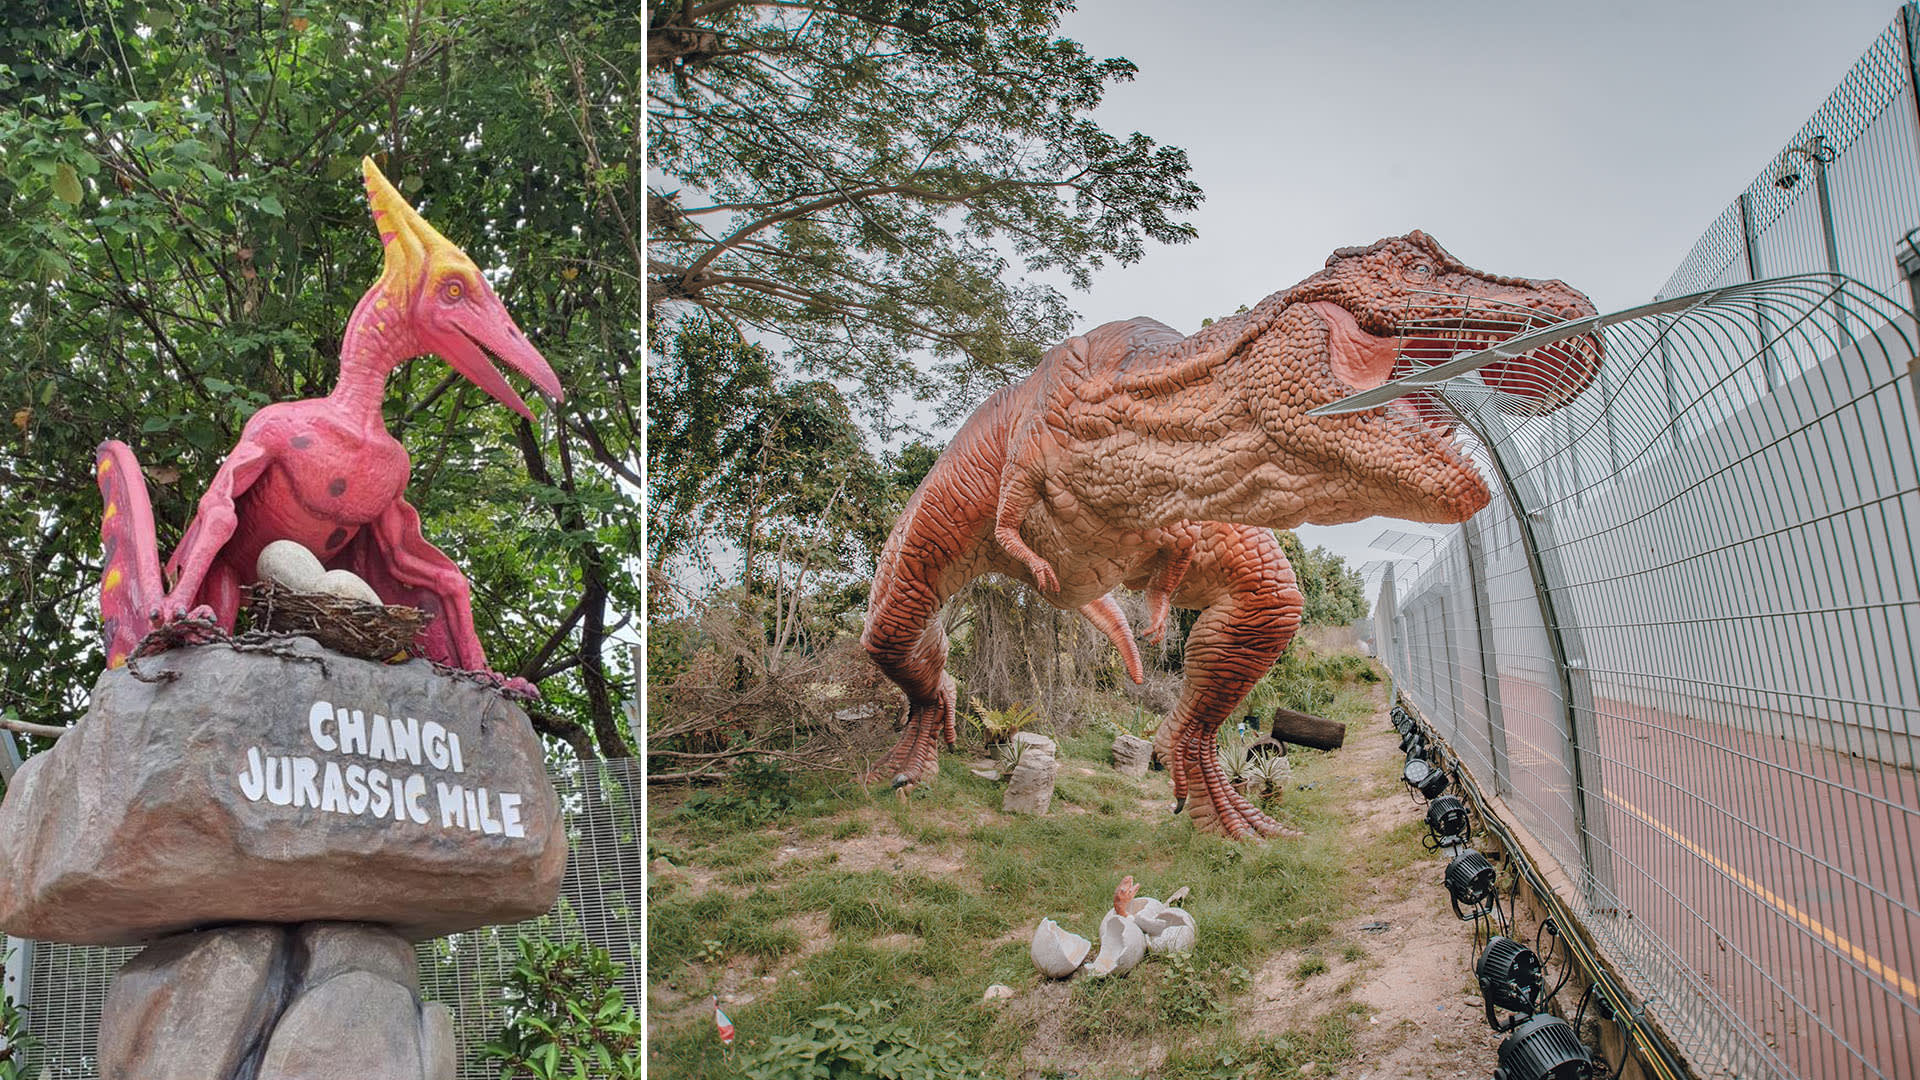 When Is Pre-Booking Entry To Jurassic Mile Required? — And Other Things To Know Before You Go Take Selfies With Dinos At The New Connector